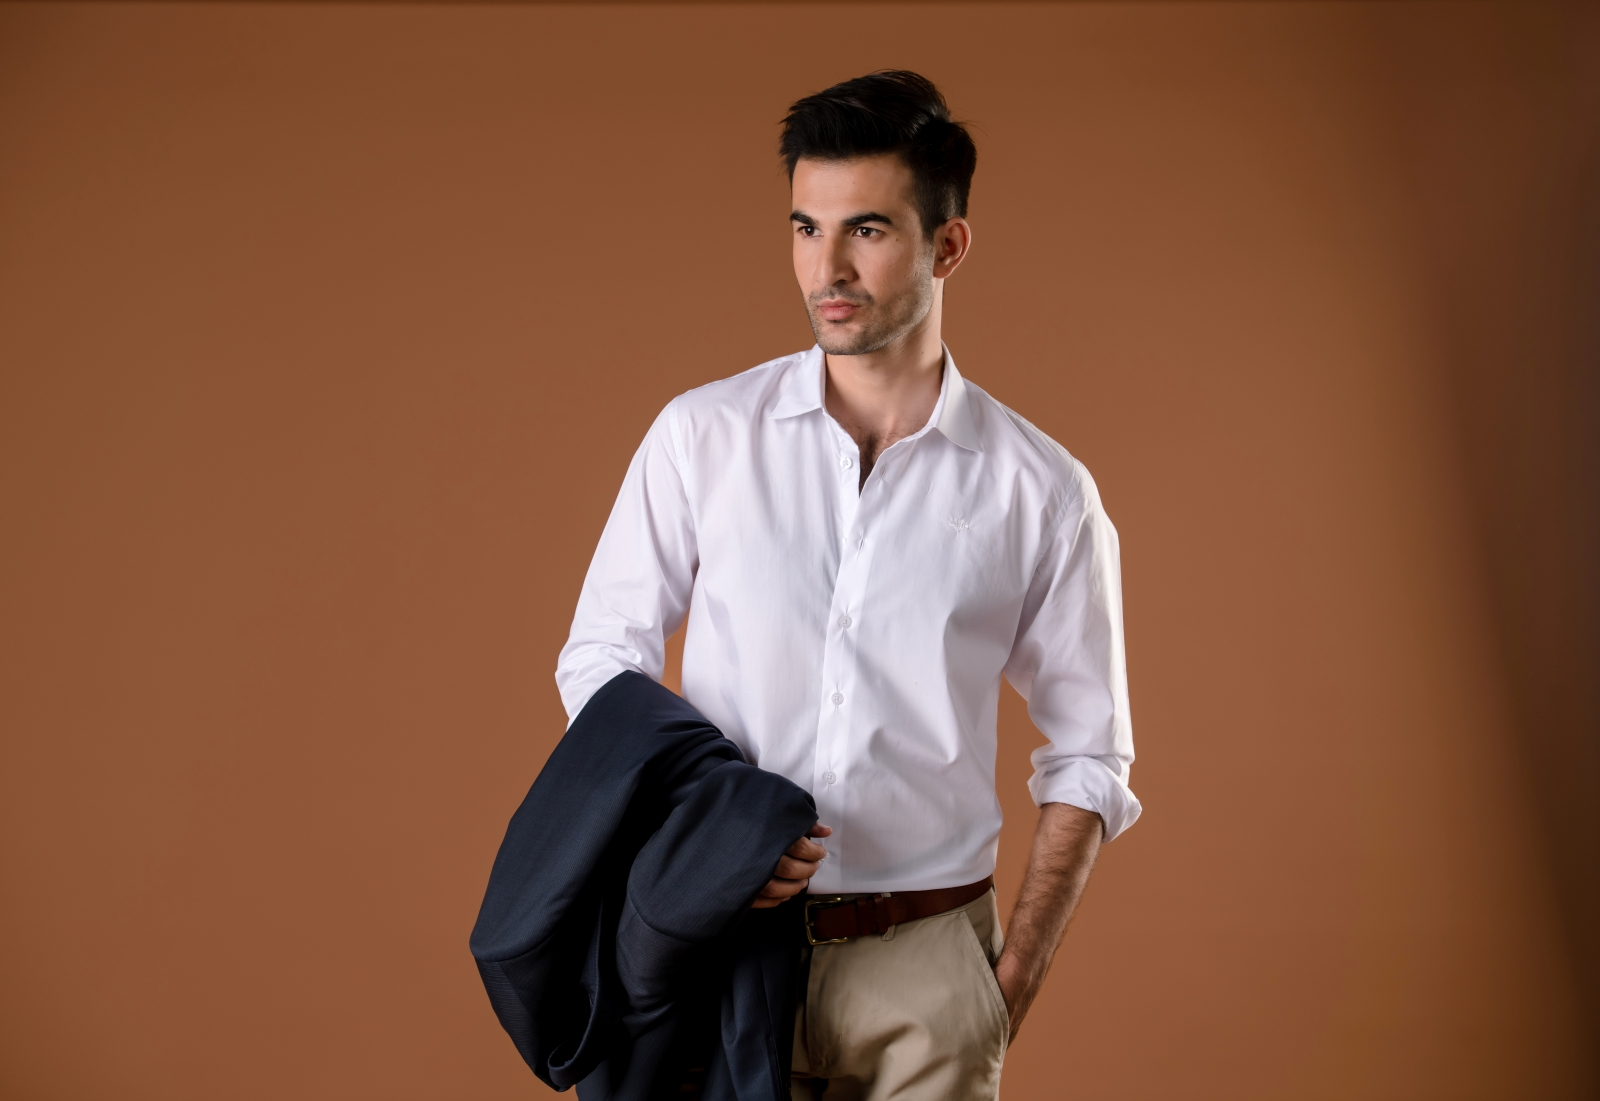 Evoke your Daily Debonair with SHAFFER's business casual collection. The most elegant of attire for the modern man. Shop the collection now and experience the essential luxury